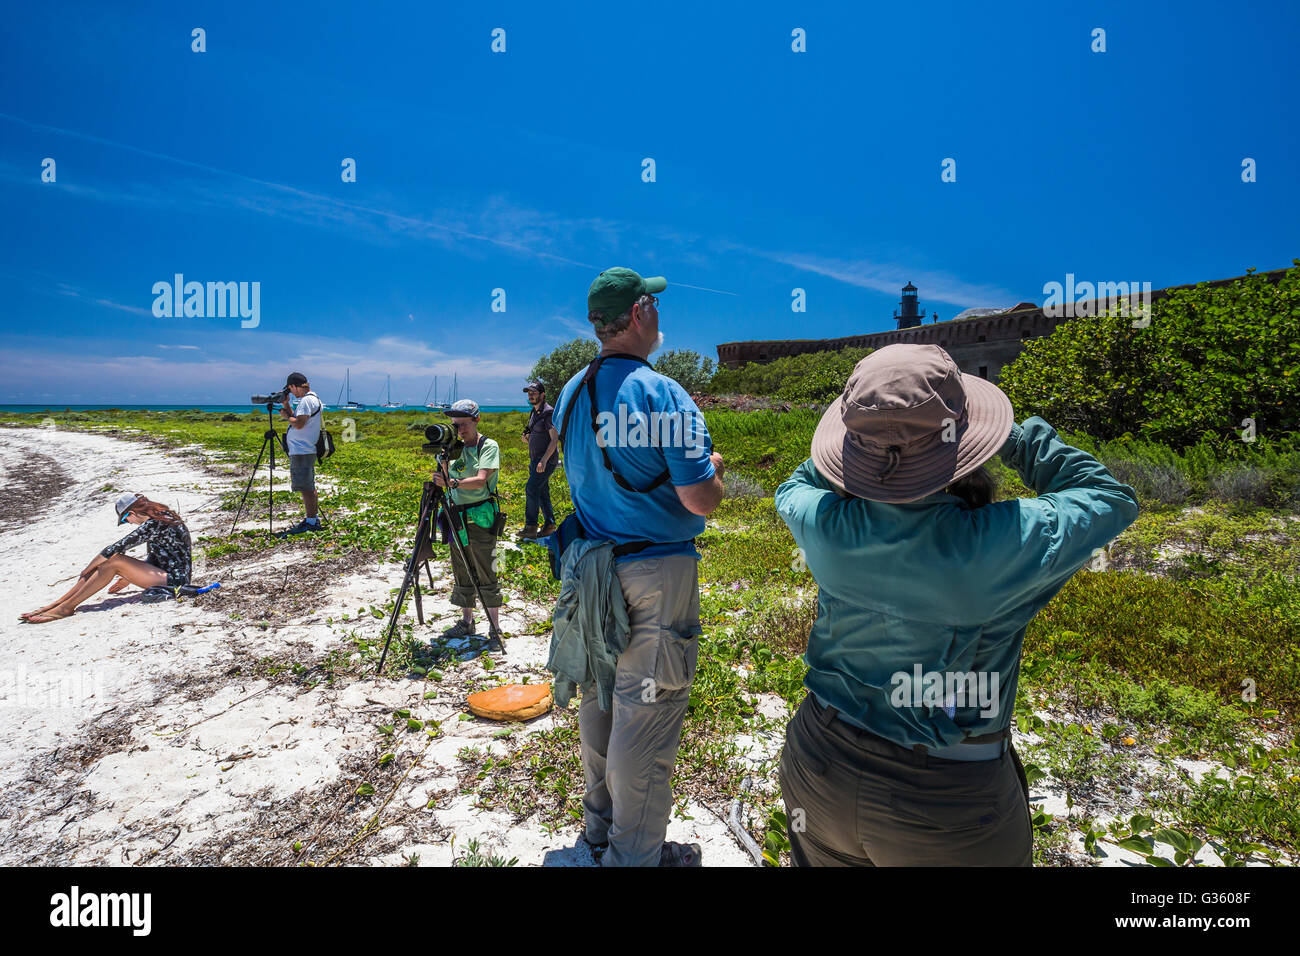 Birders on the beach ouside Fort Jefferson, Garden Key in Dry Tortugas National Park, Florida, USA Stock Photo